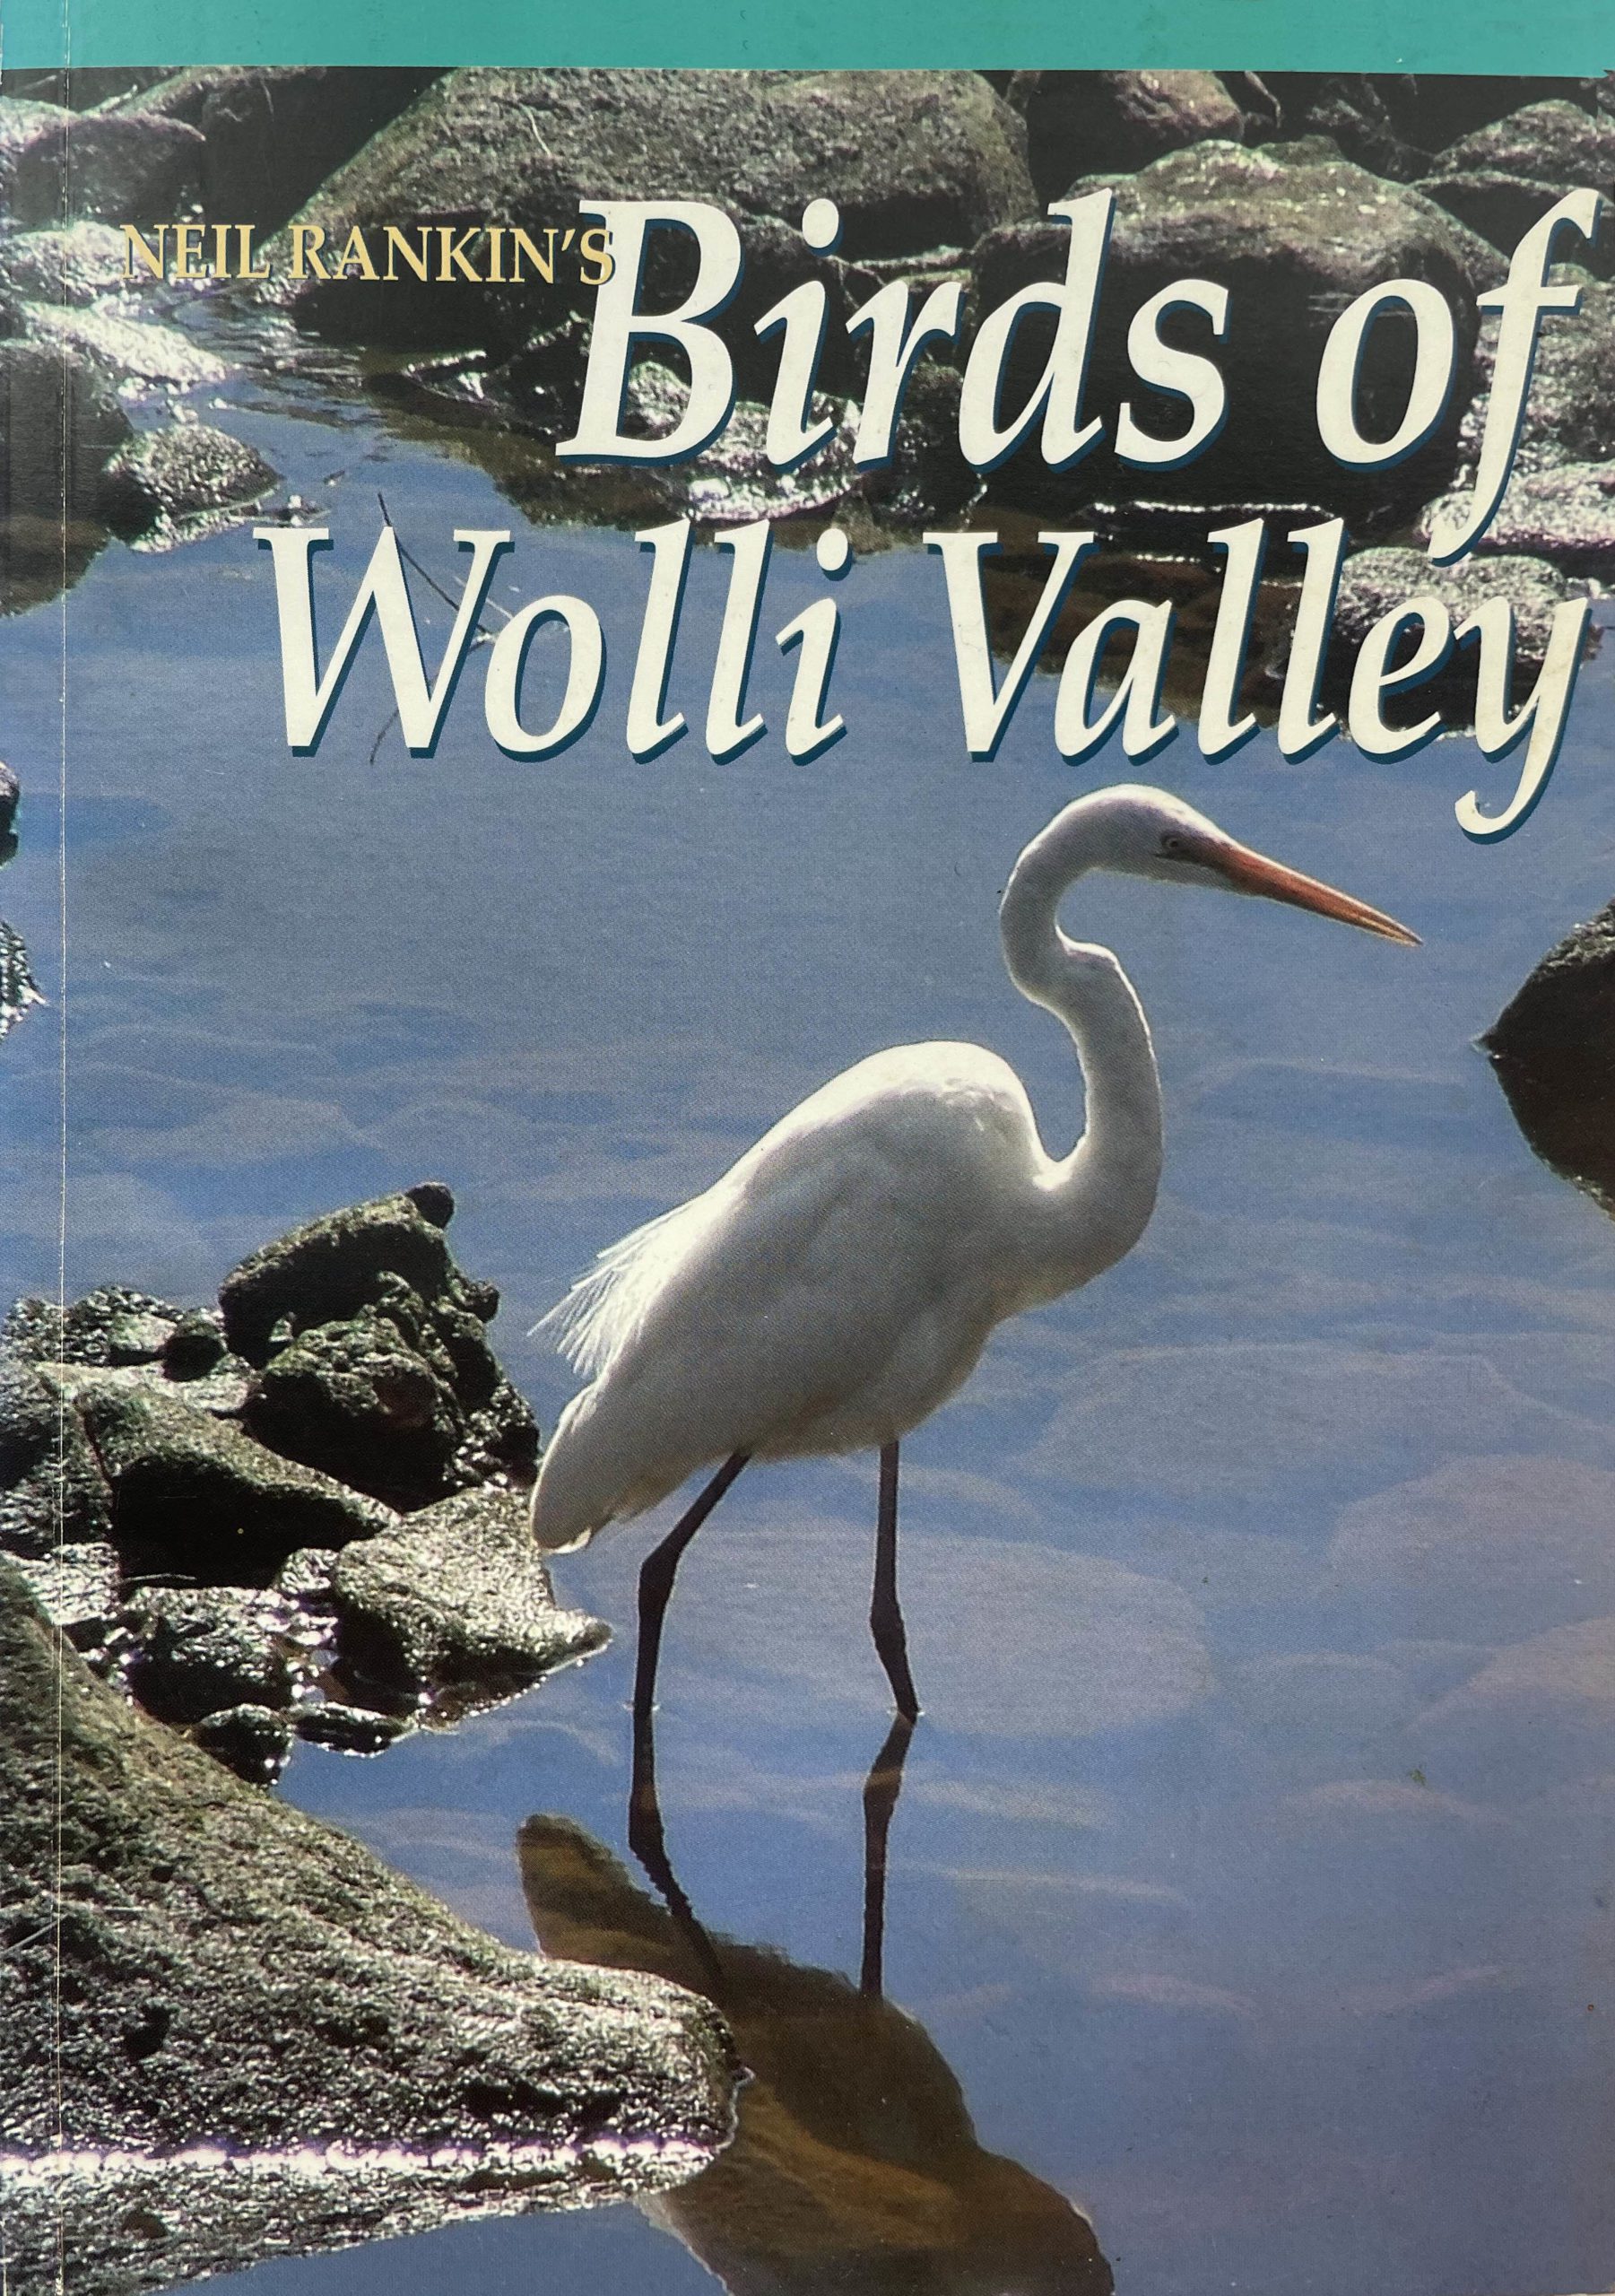 Birds of the Wolli Valley